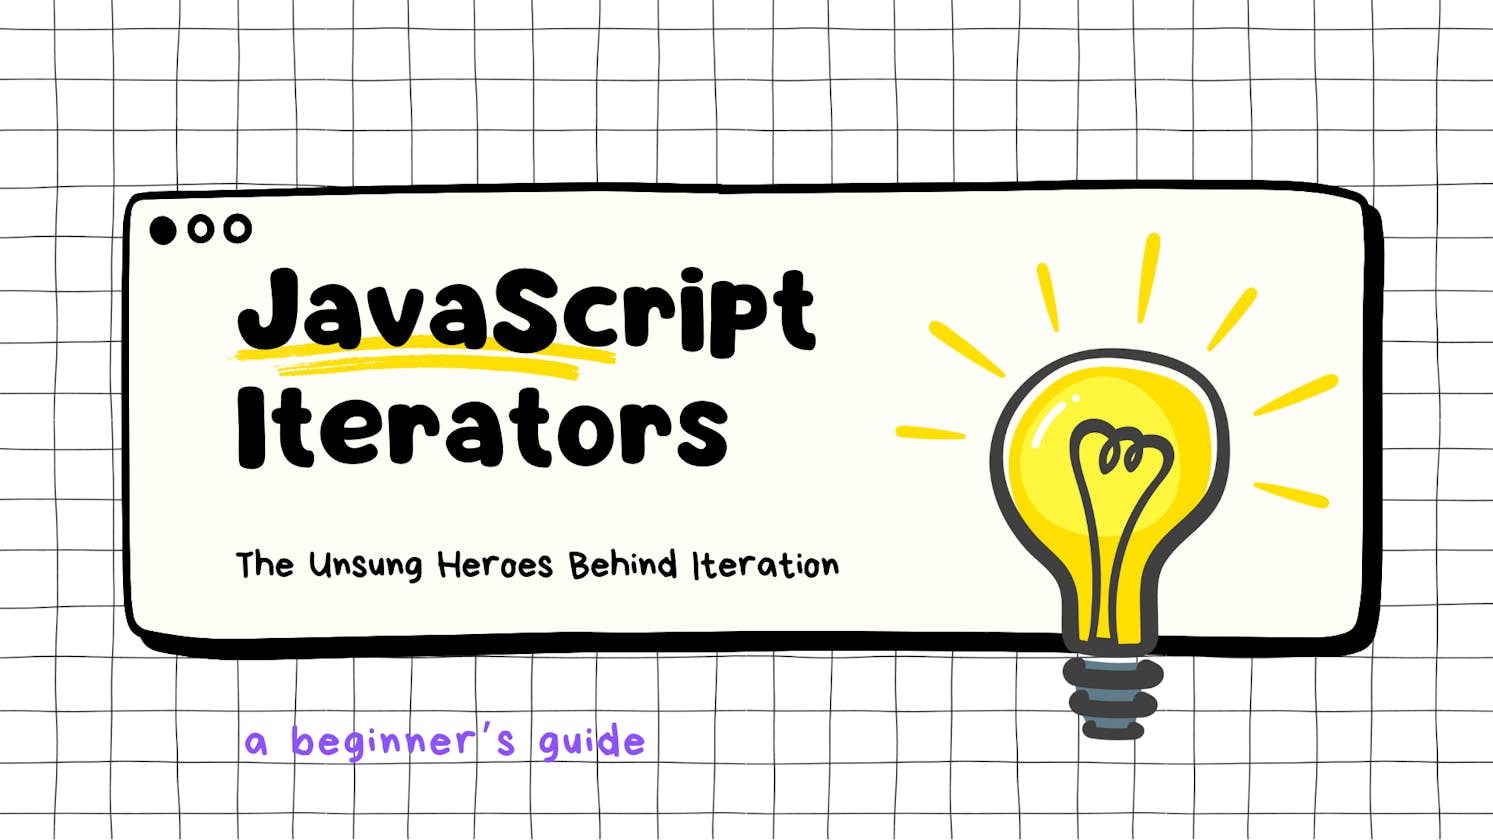 A Beginner's Guide to JavaScript Iteration